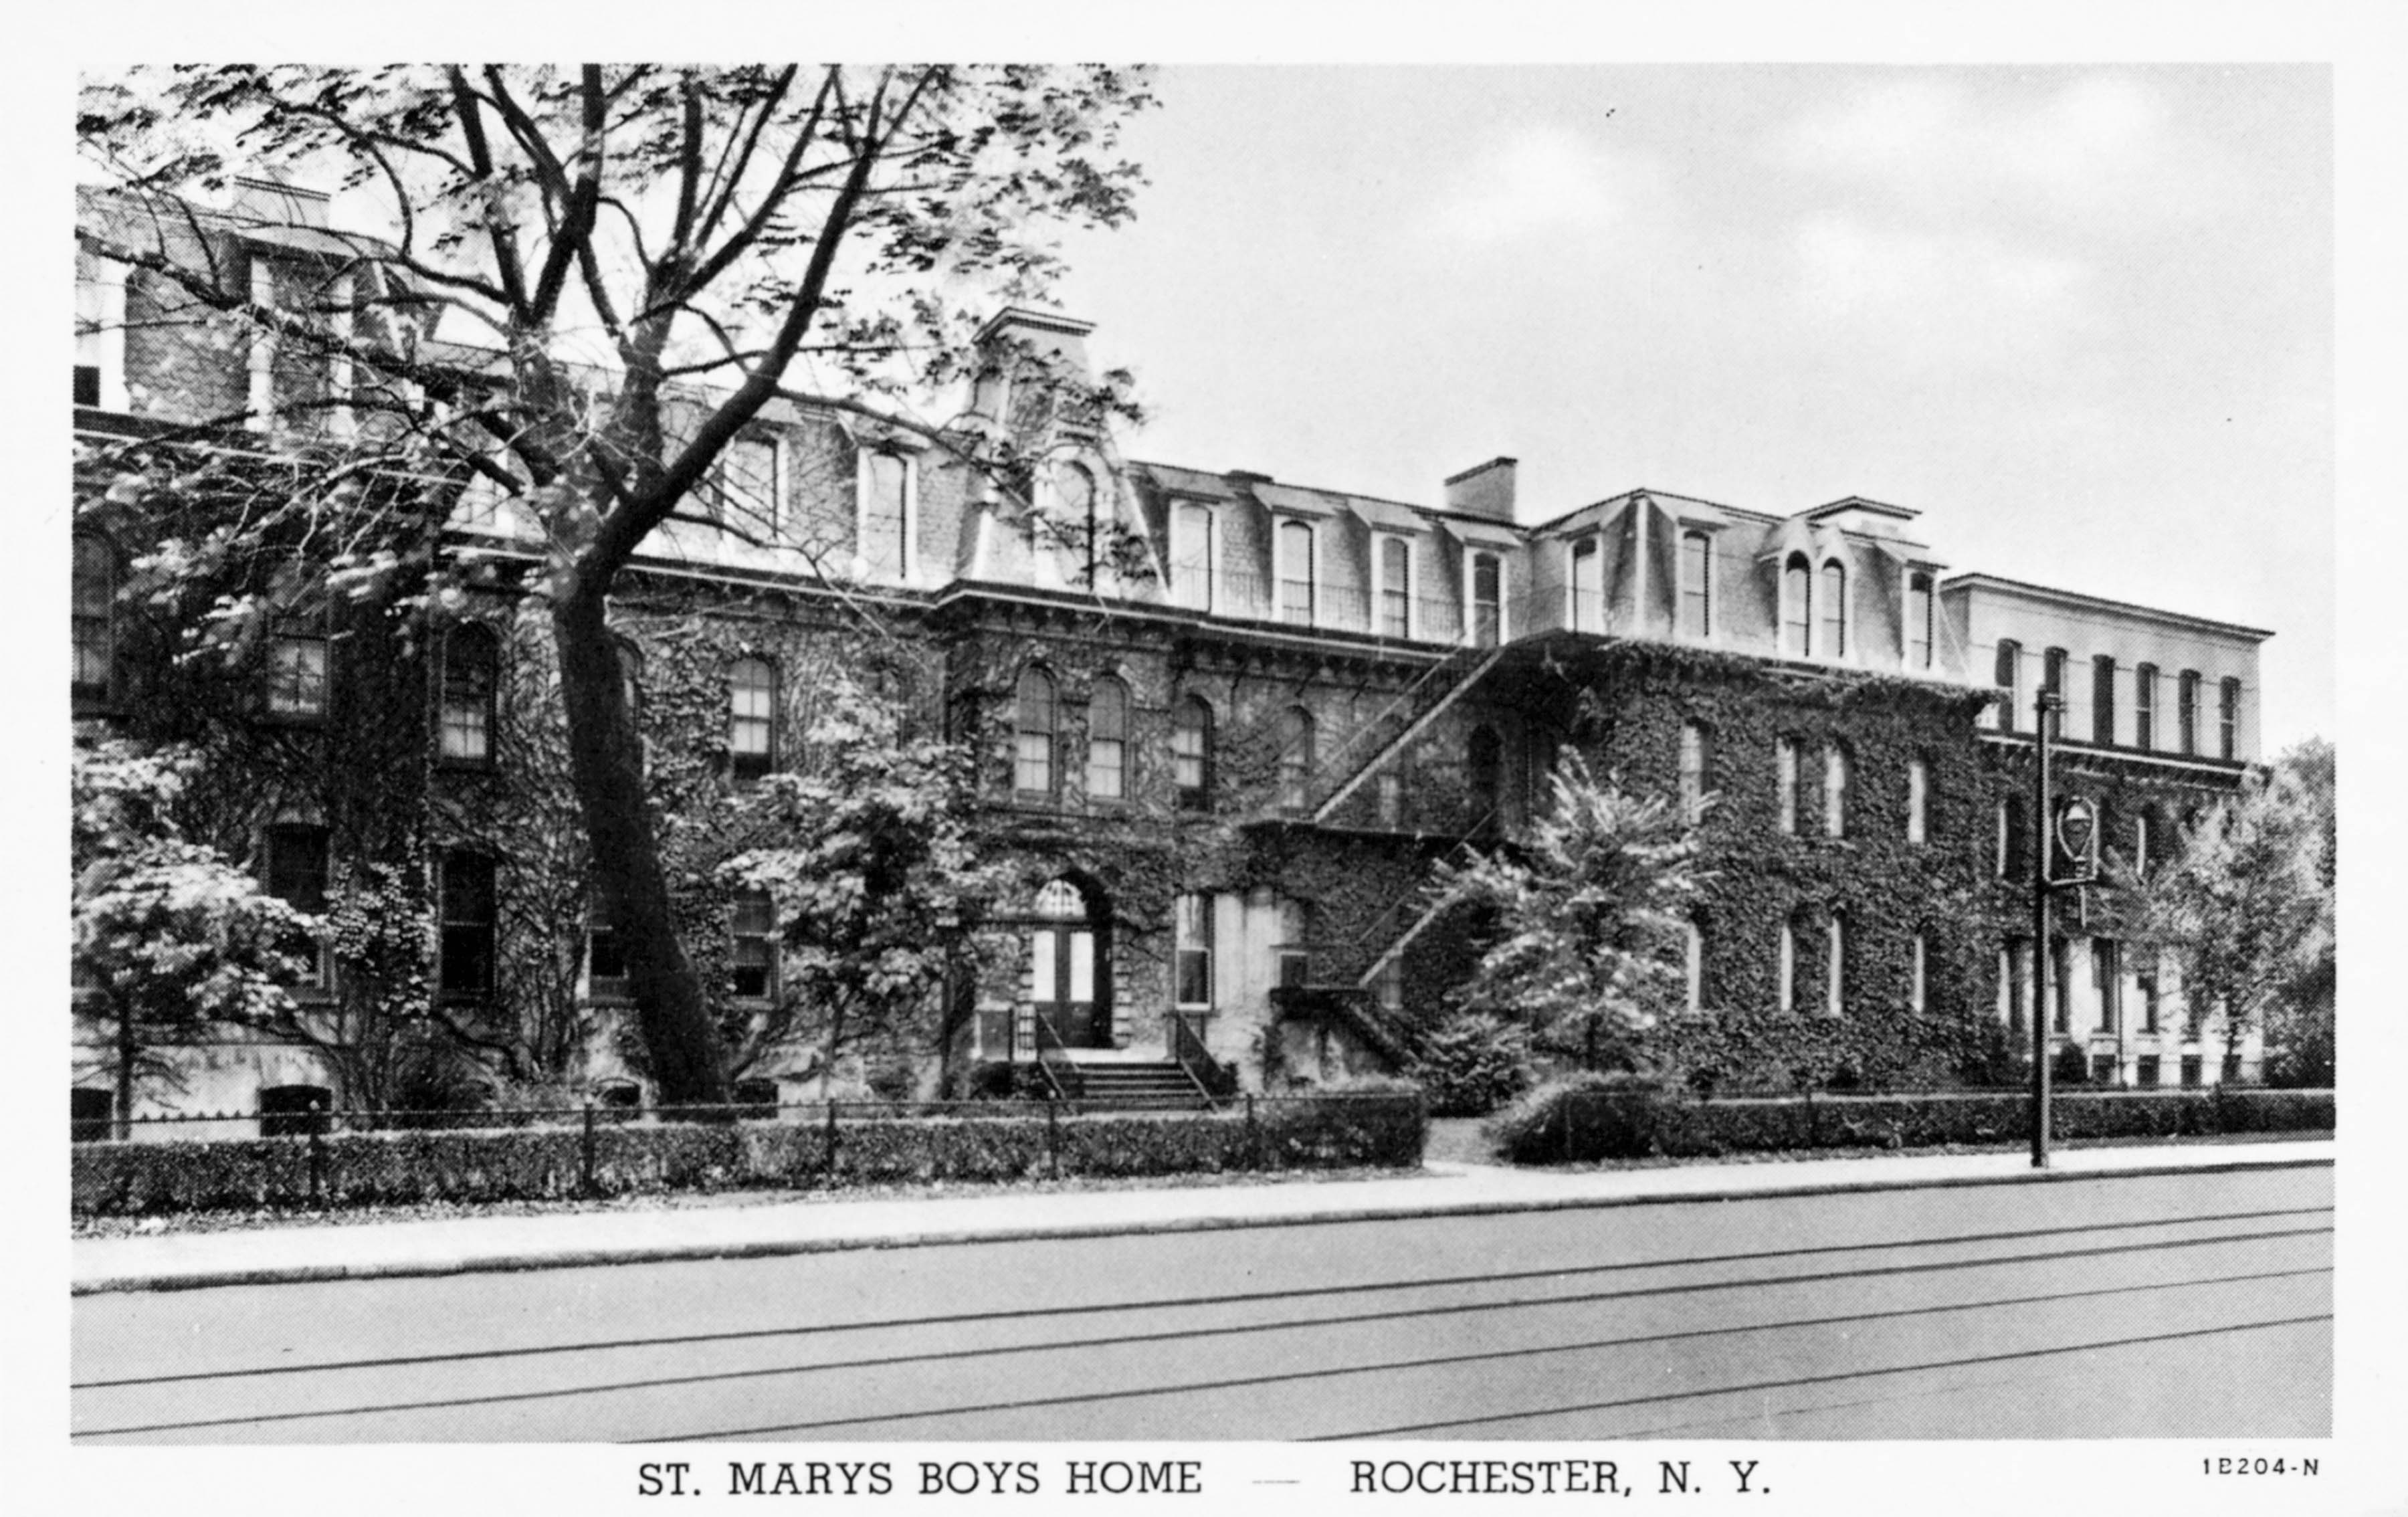 St. Mary's Boys Home, Rochester